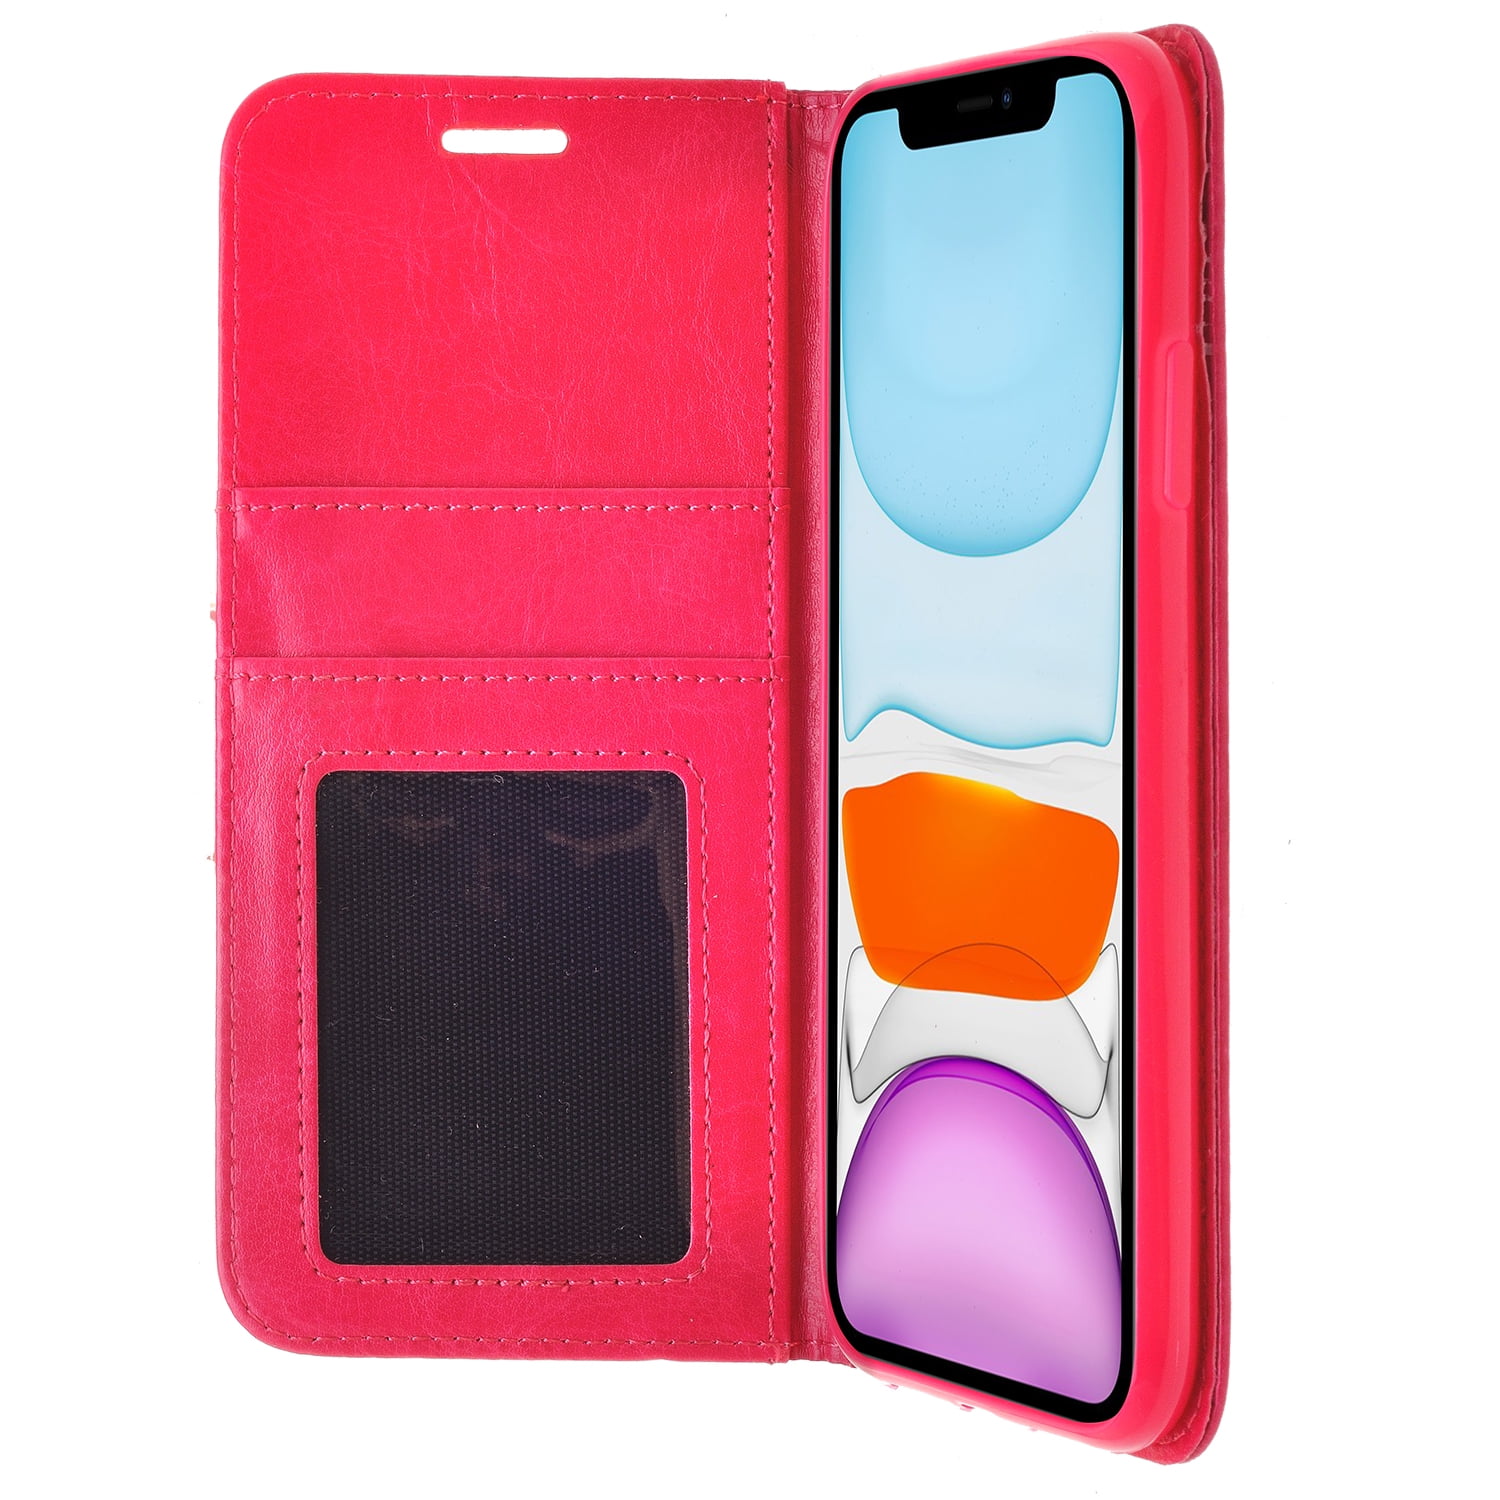 ZIZO WALLET FOLIO Series for iPhone 11 Pro Max Case - Magnetic Flap ...